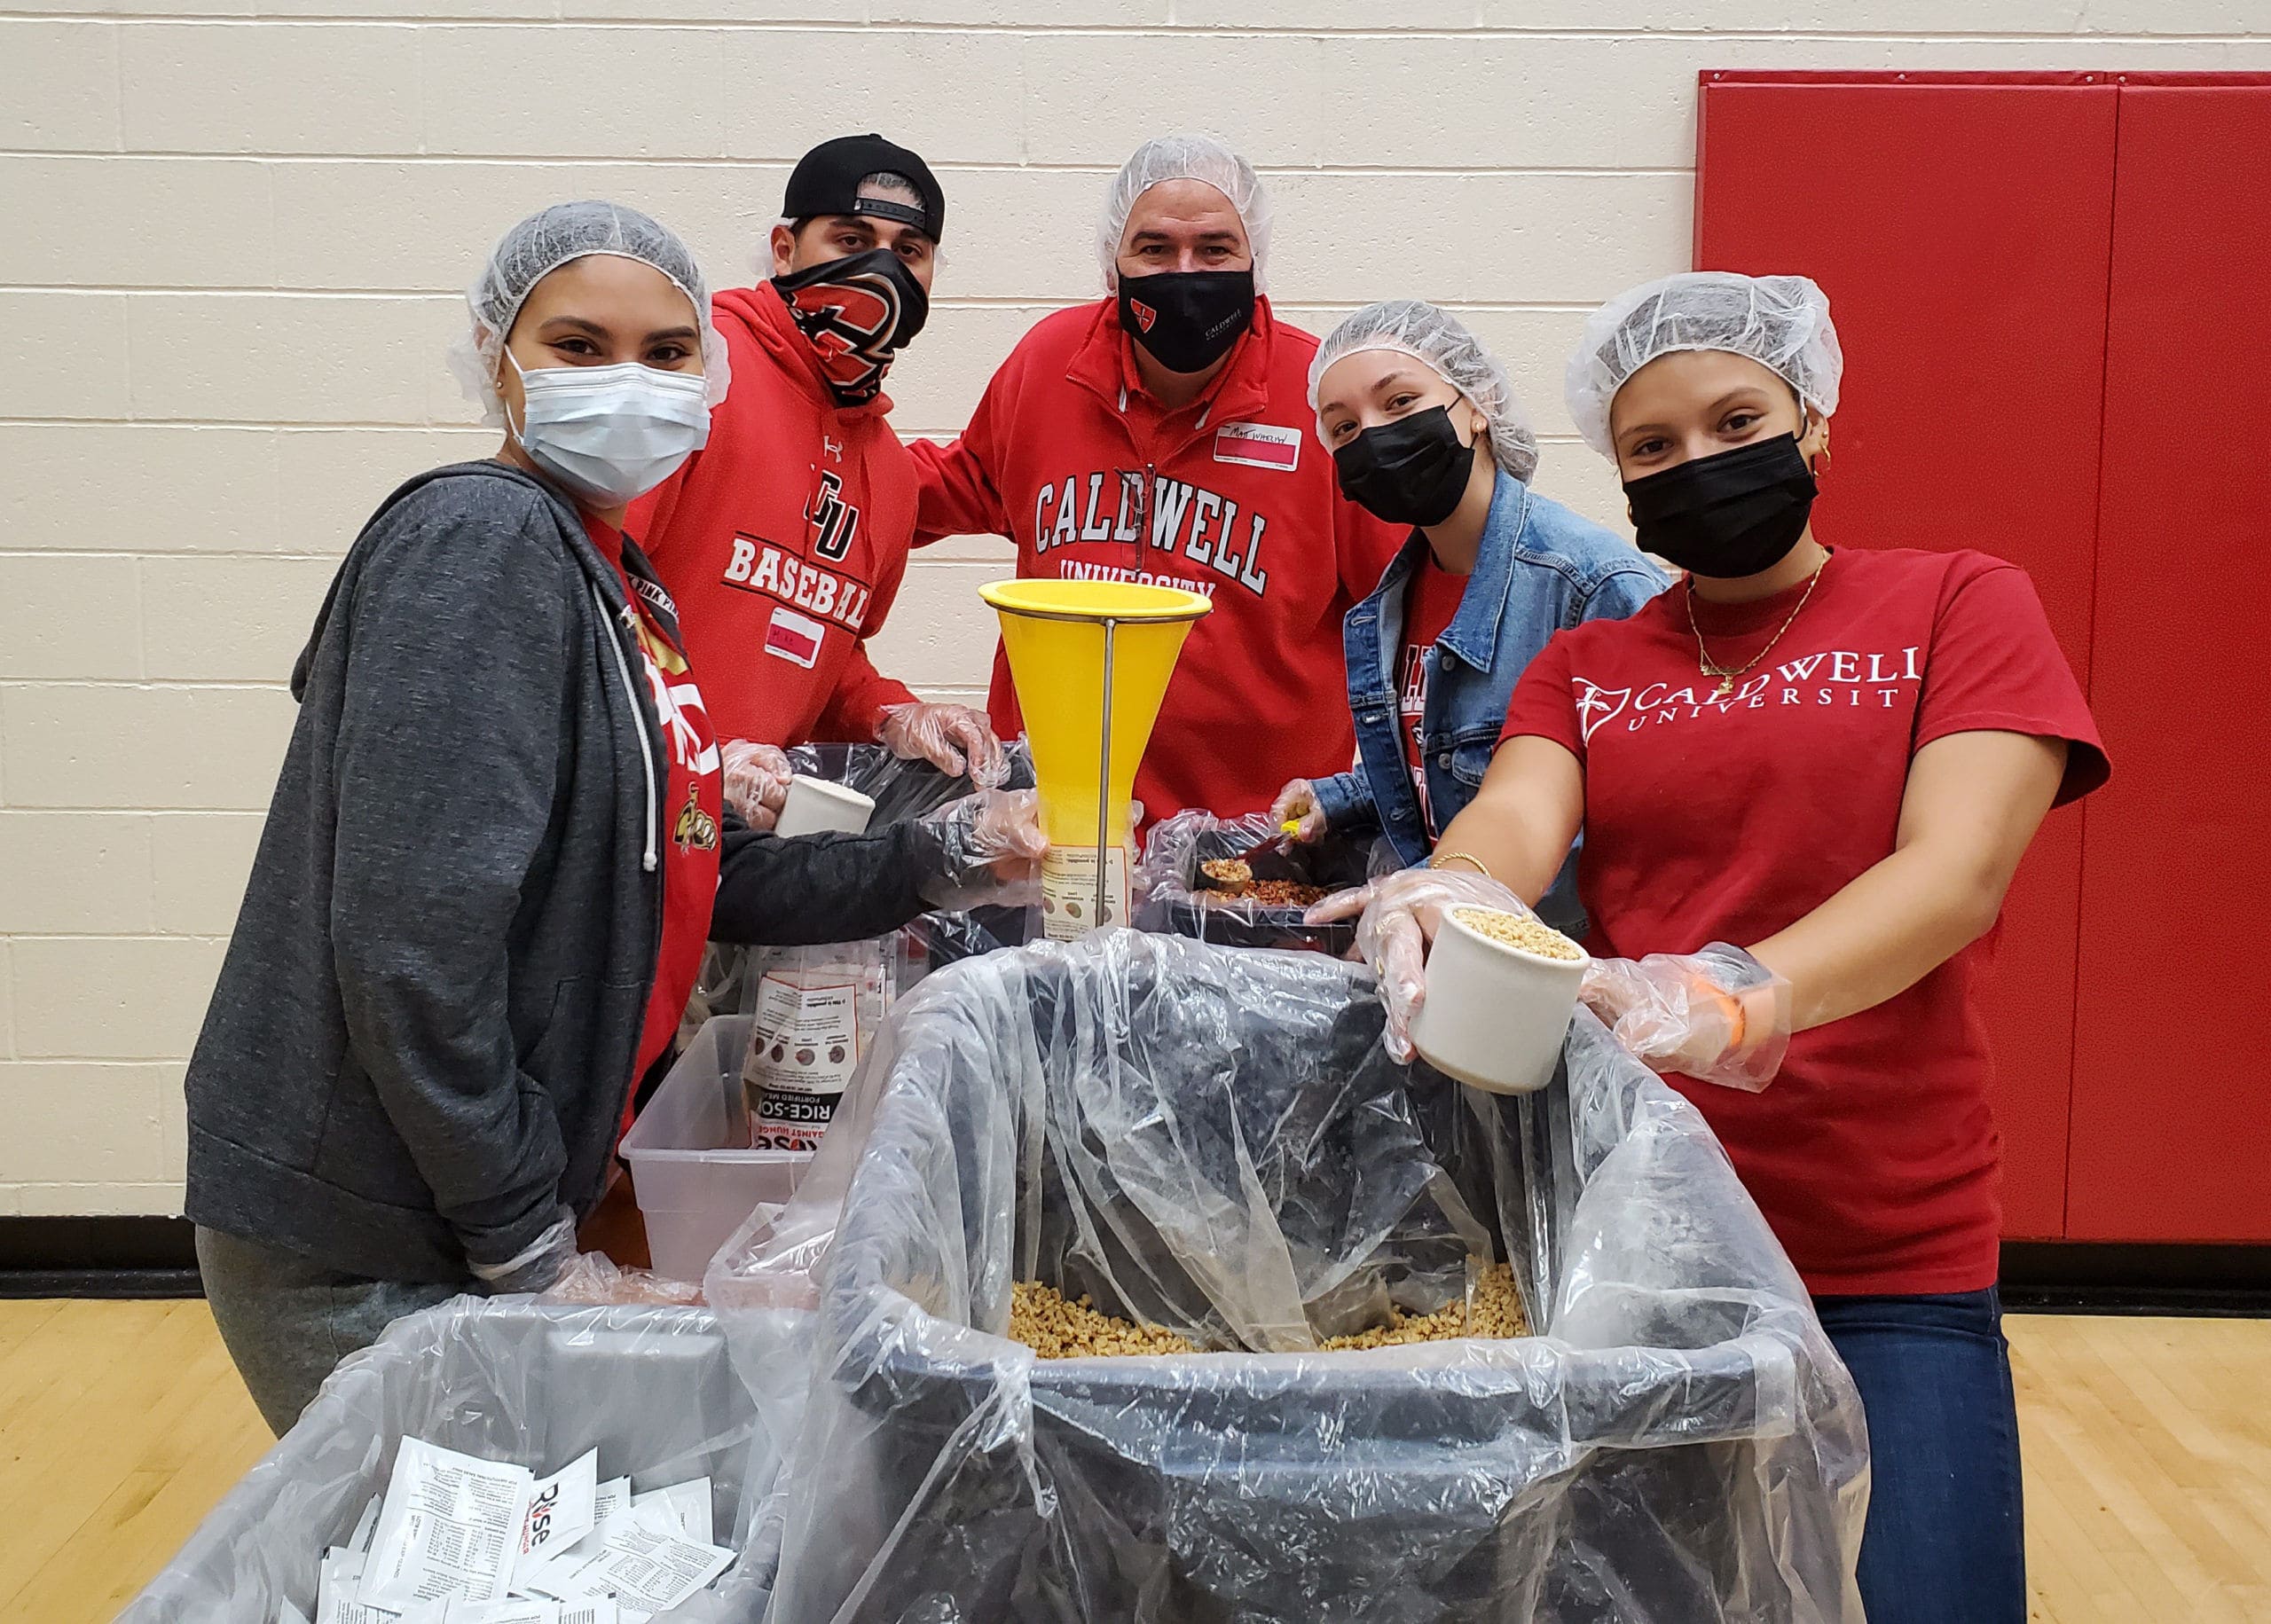 Featured image: Caldwell University President Matthew Whelan, Ed.D. and students packaging meals for Rise Against Hunger for Caldwell Service Day. (Courtesy of Caldwell University)